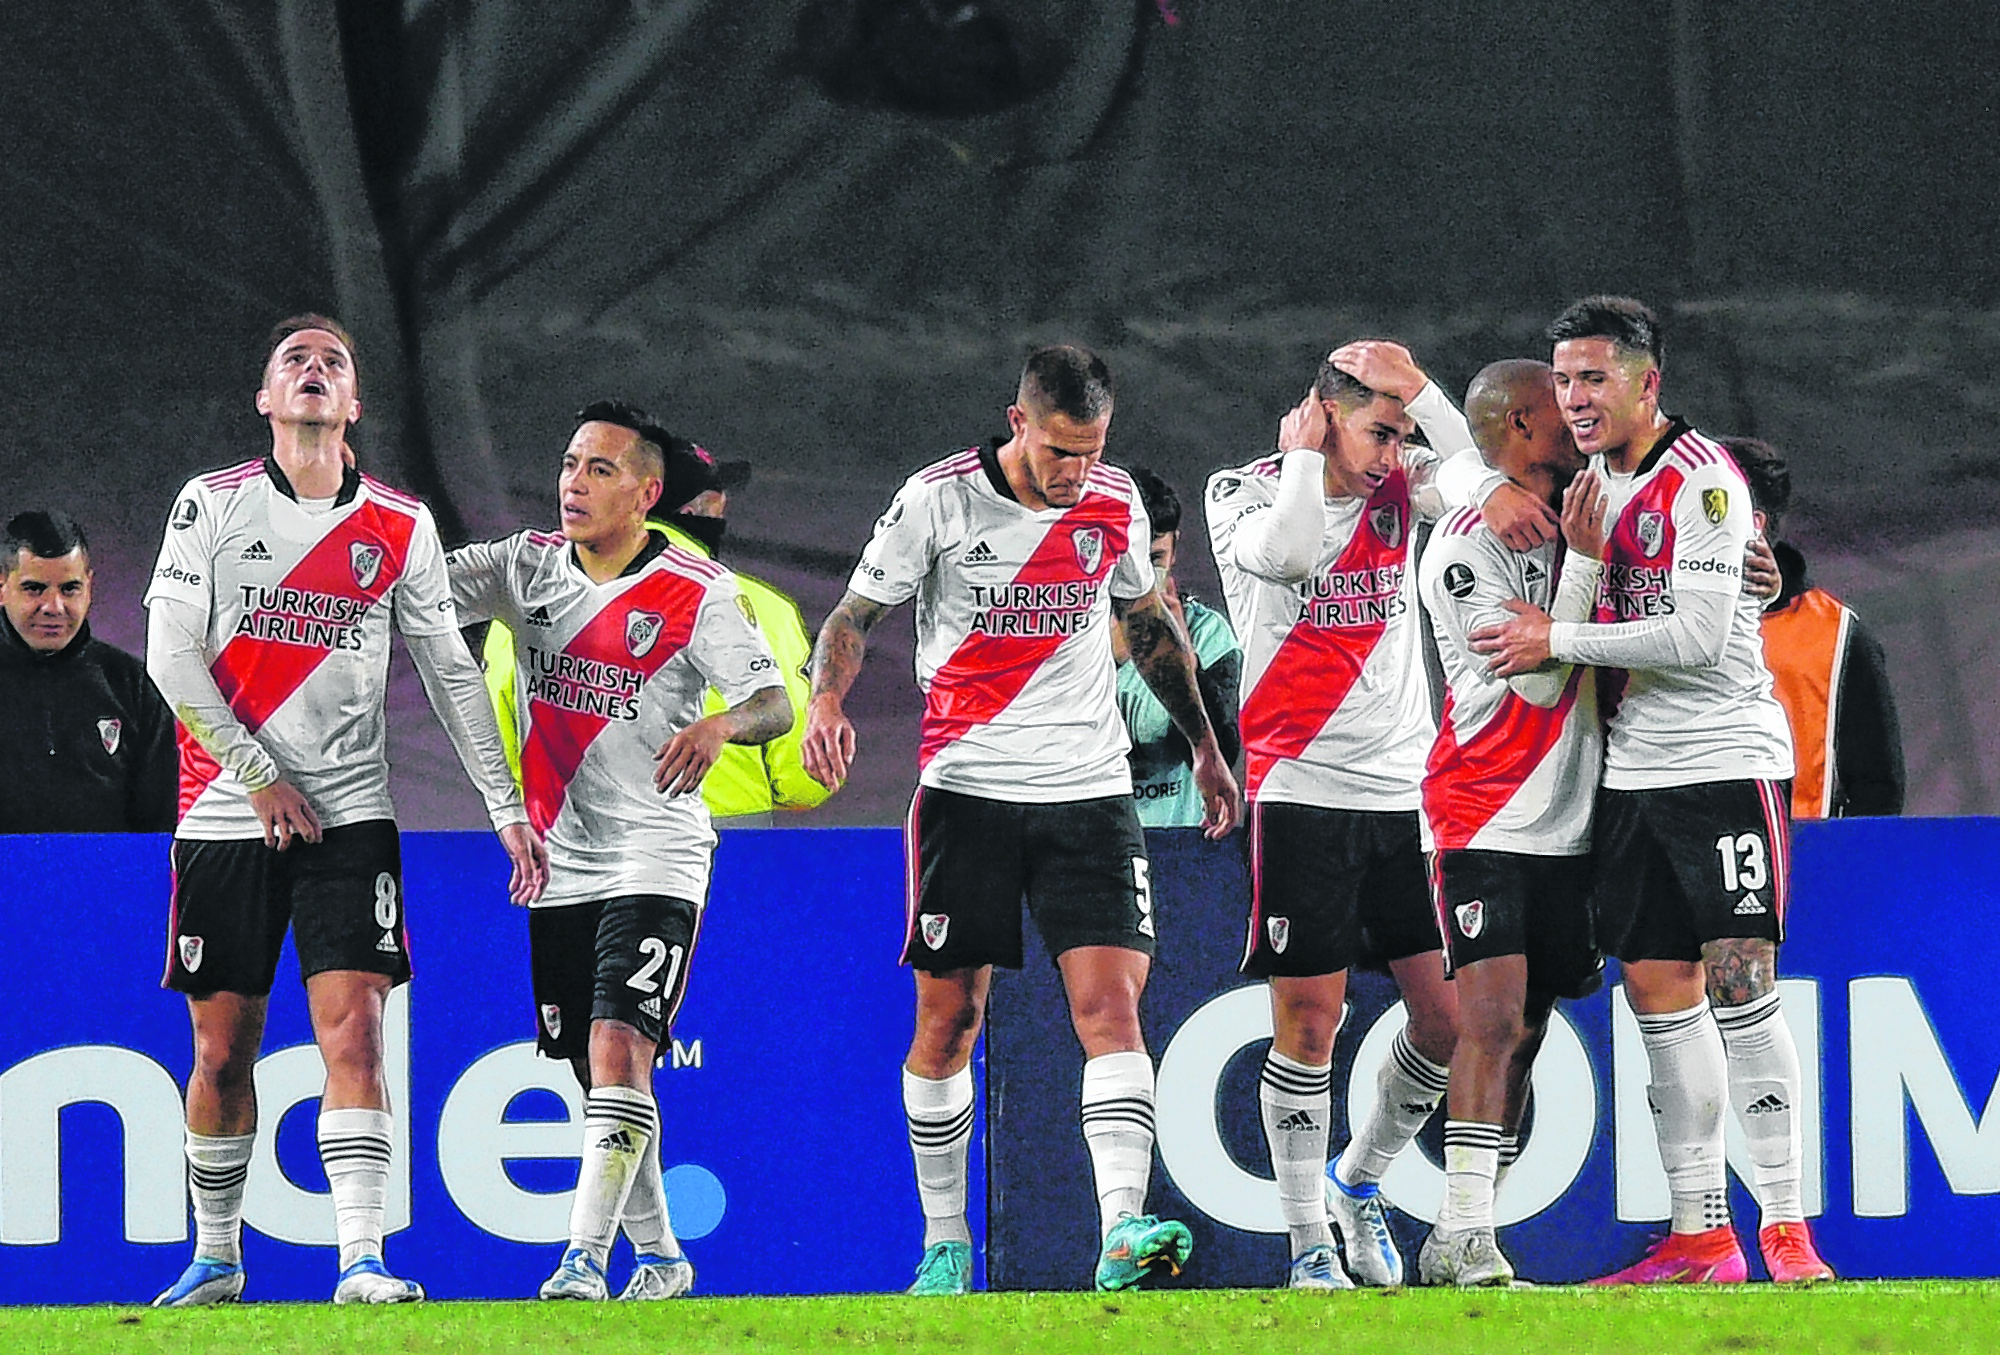 Agustin Palavecino of Argentina's River Plate, left, celebrates with teammates after scoring his side's opening goal during a Copa Libertadores soccer match against Chile's Colo Colo at Antonio Liberti Vespucio stadium in Buenos Aires, Argentina, Thursday, May 19, 2022. (AP Photo/Gustavo Garello)